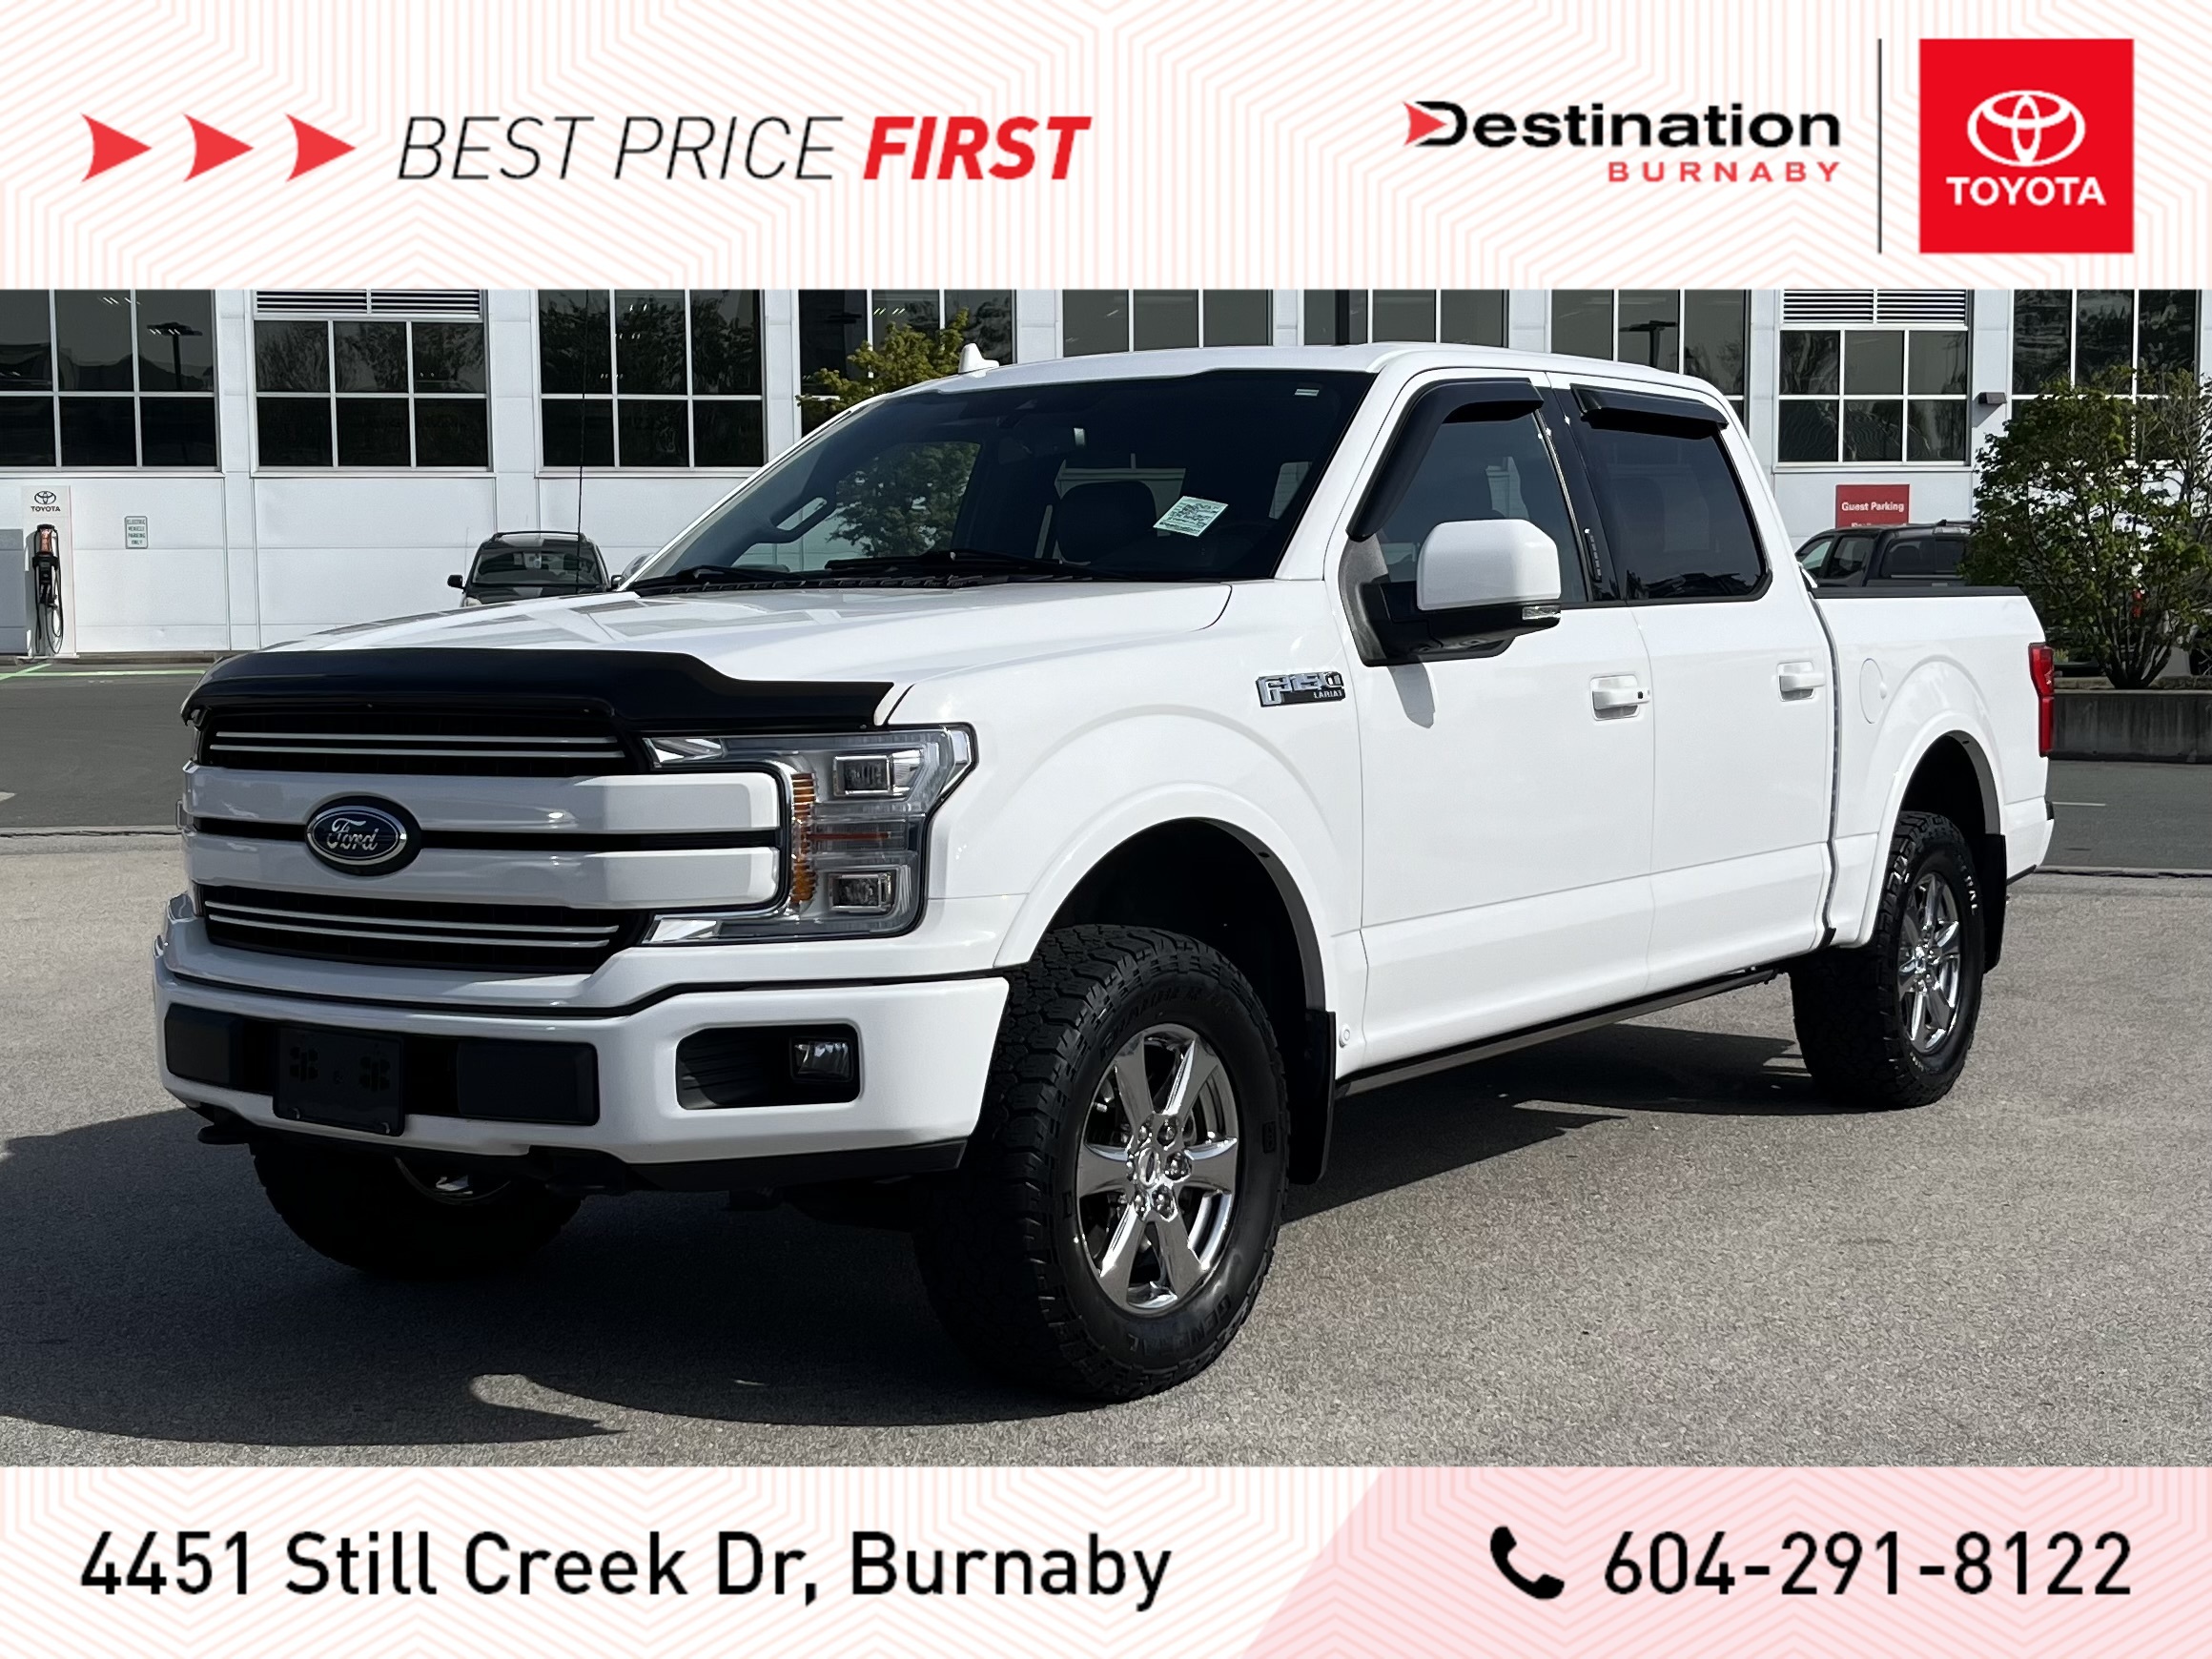 2018 Ford F-150 Lariat 3.5 V6, 502A Luxury, Loaded, No accidents